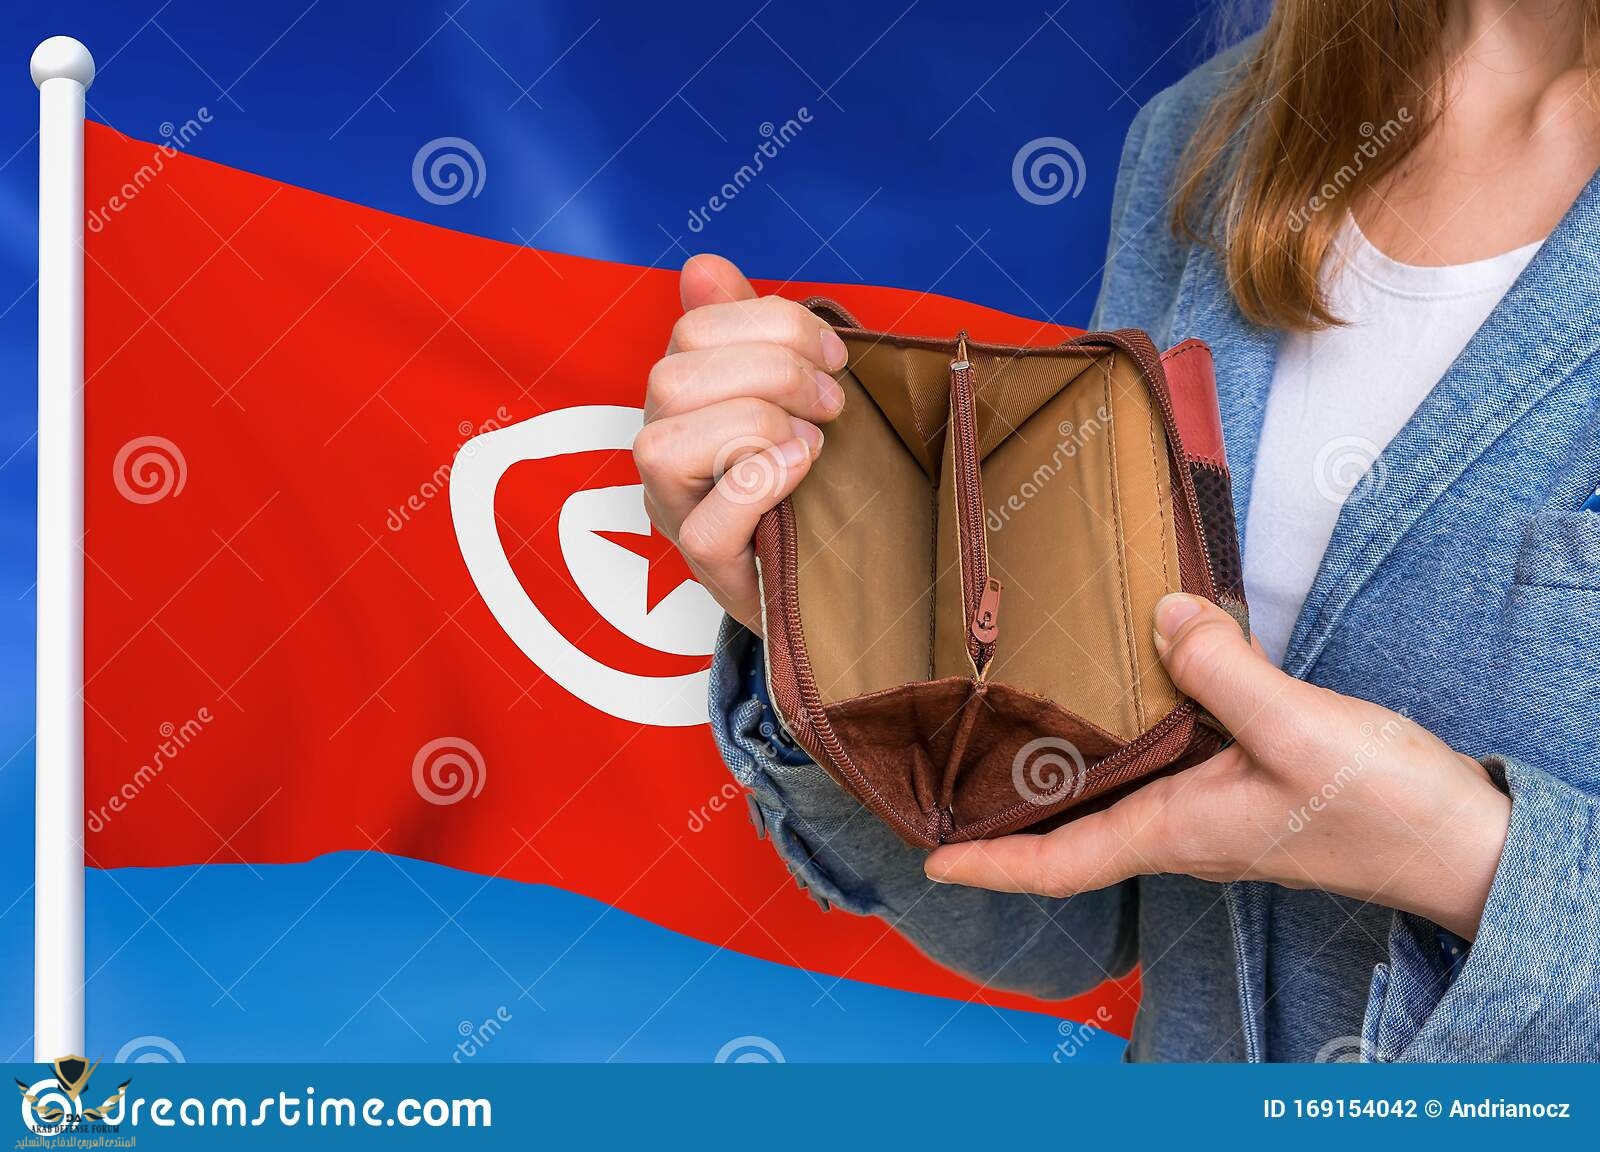 finance-problem-tunisia-poor-person-empty-wallet-national-flag-background-poor-person-empty-wa...jpg